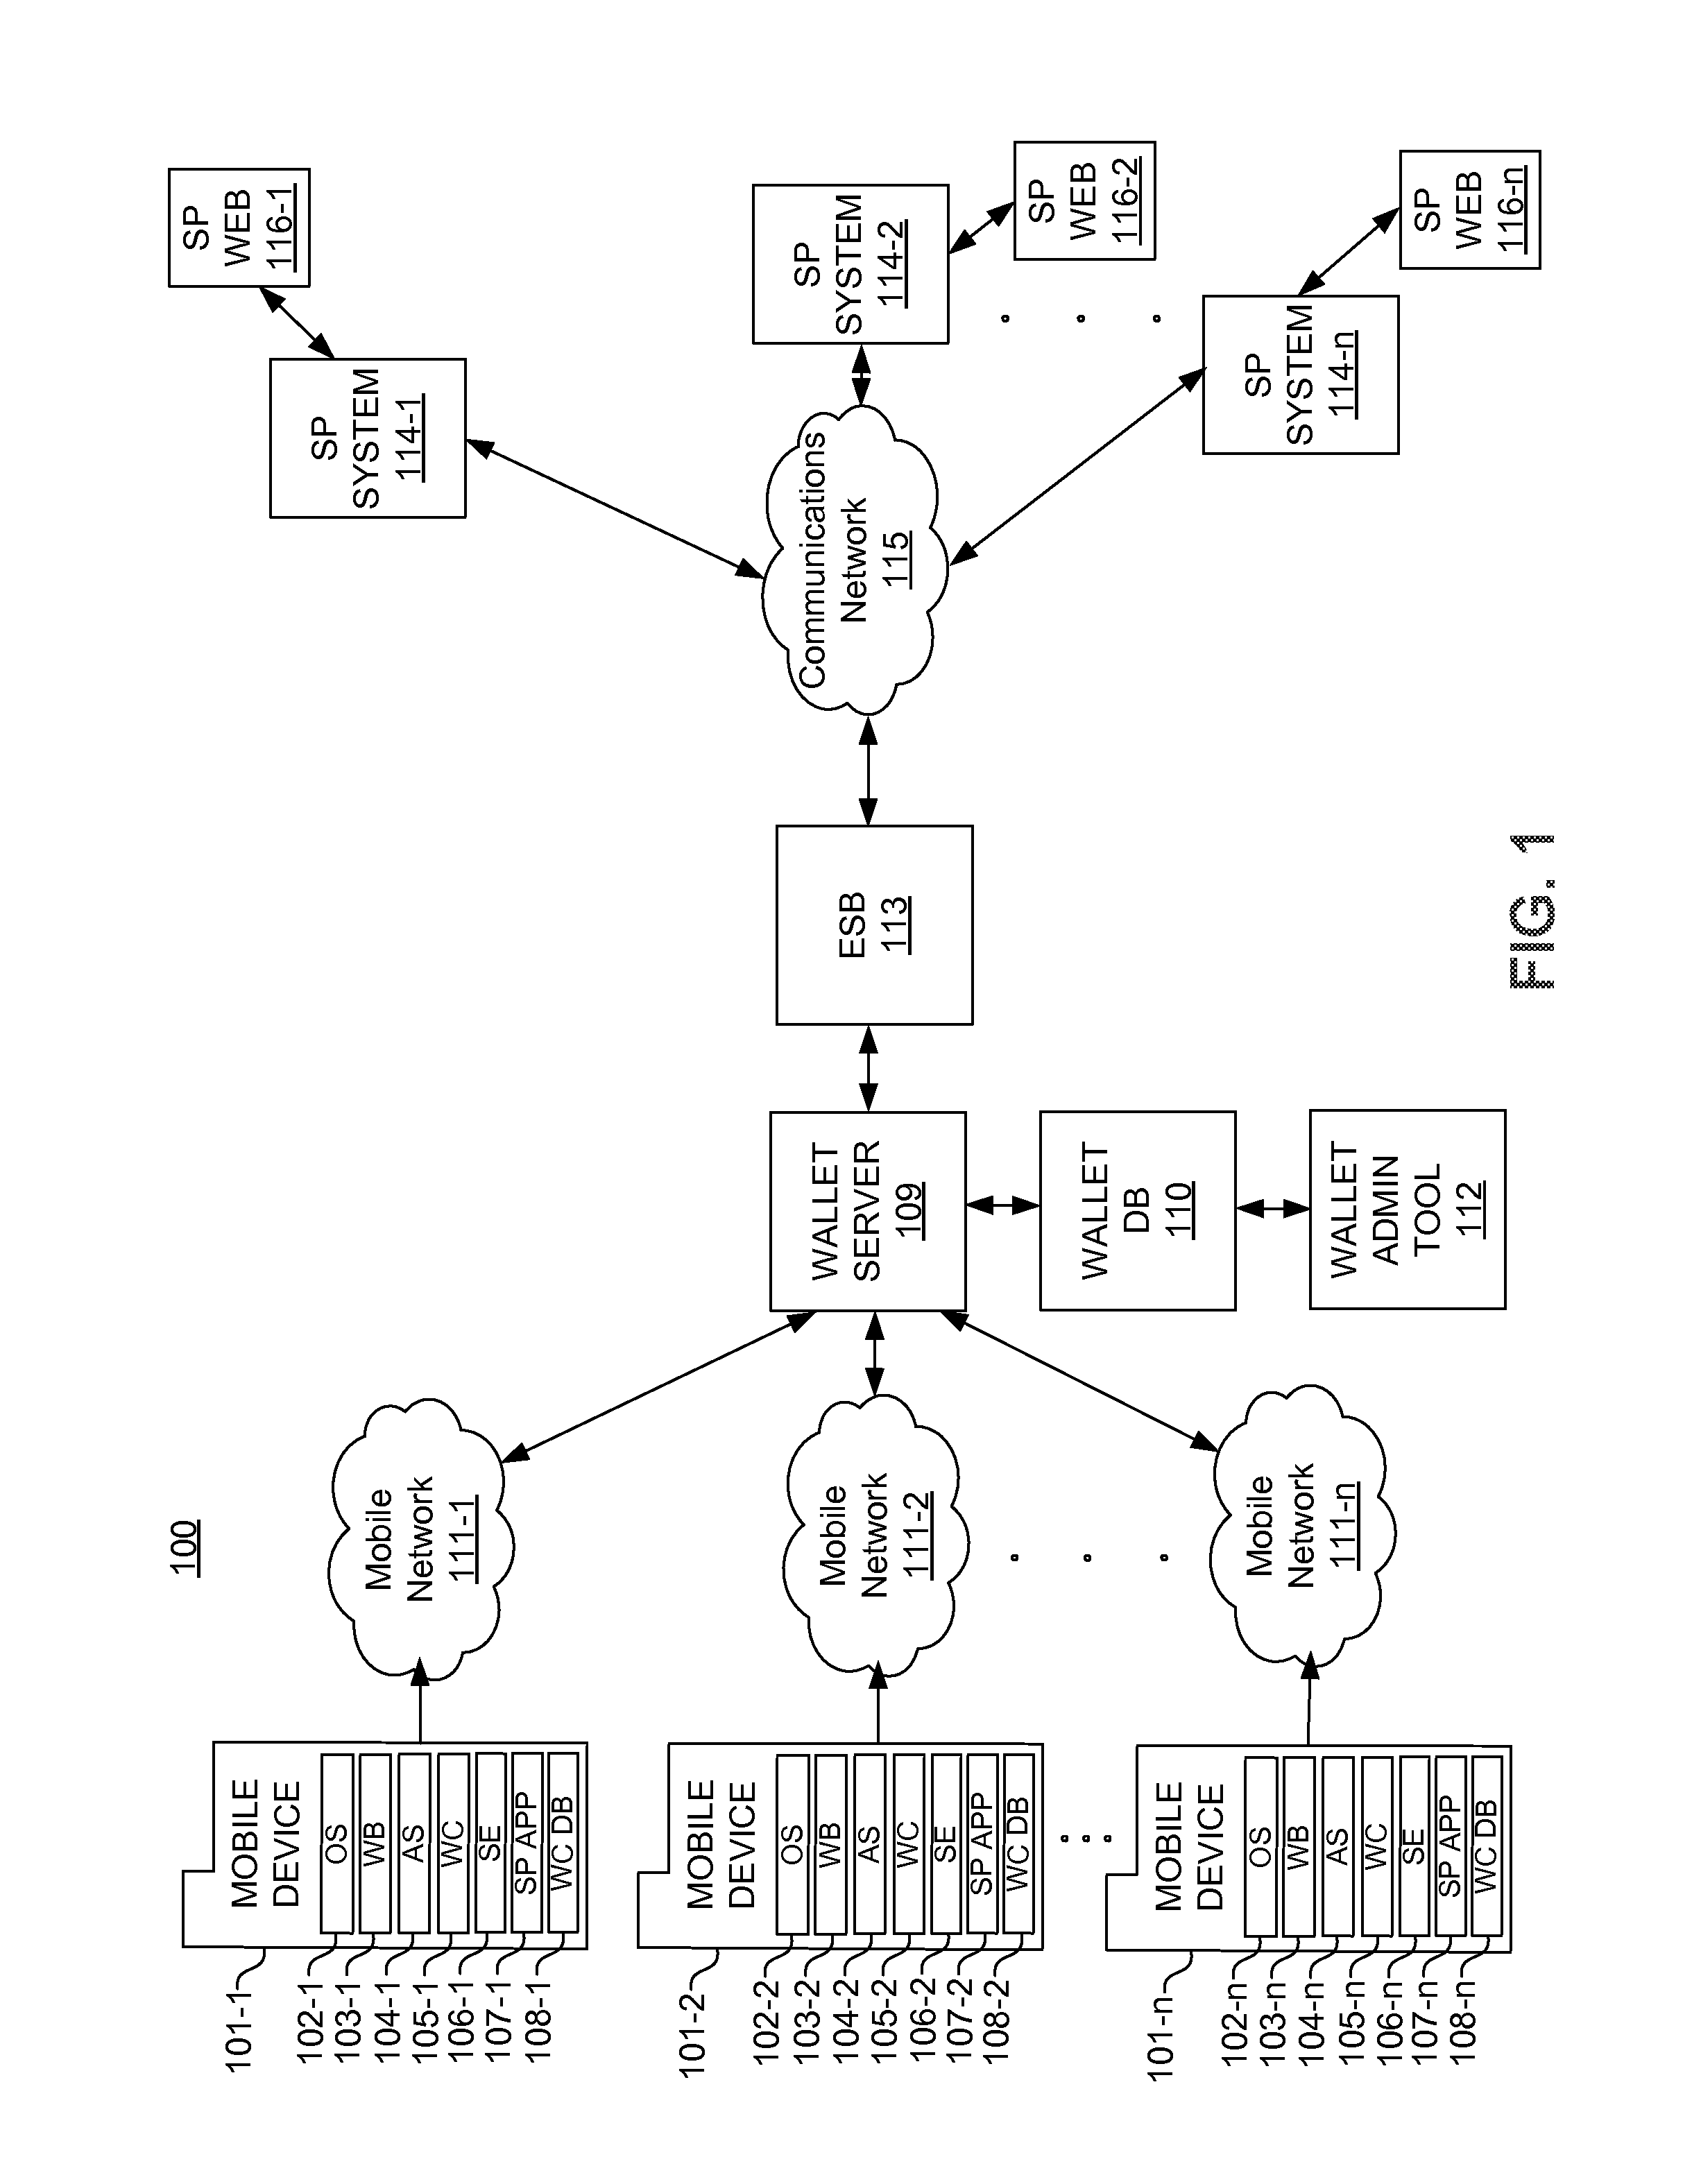 Systems, methods, and computer program products for integrating third party services with a mobile wallet